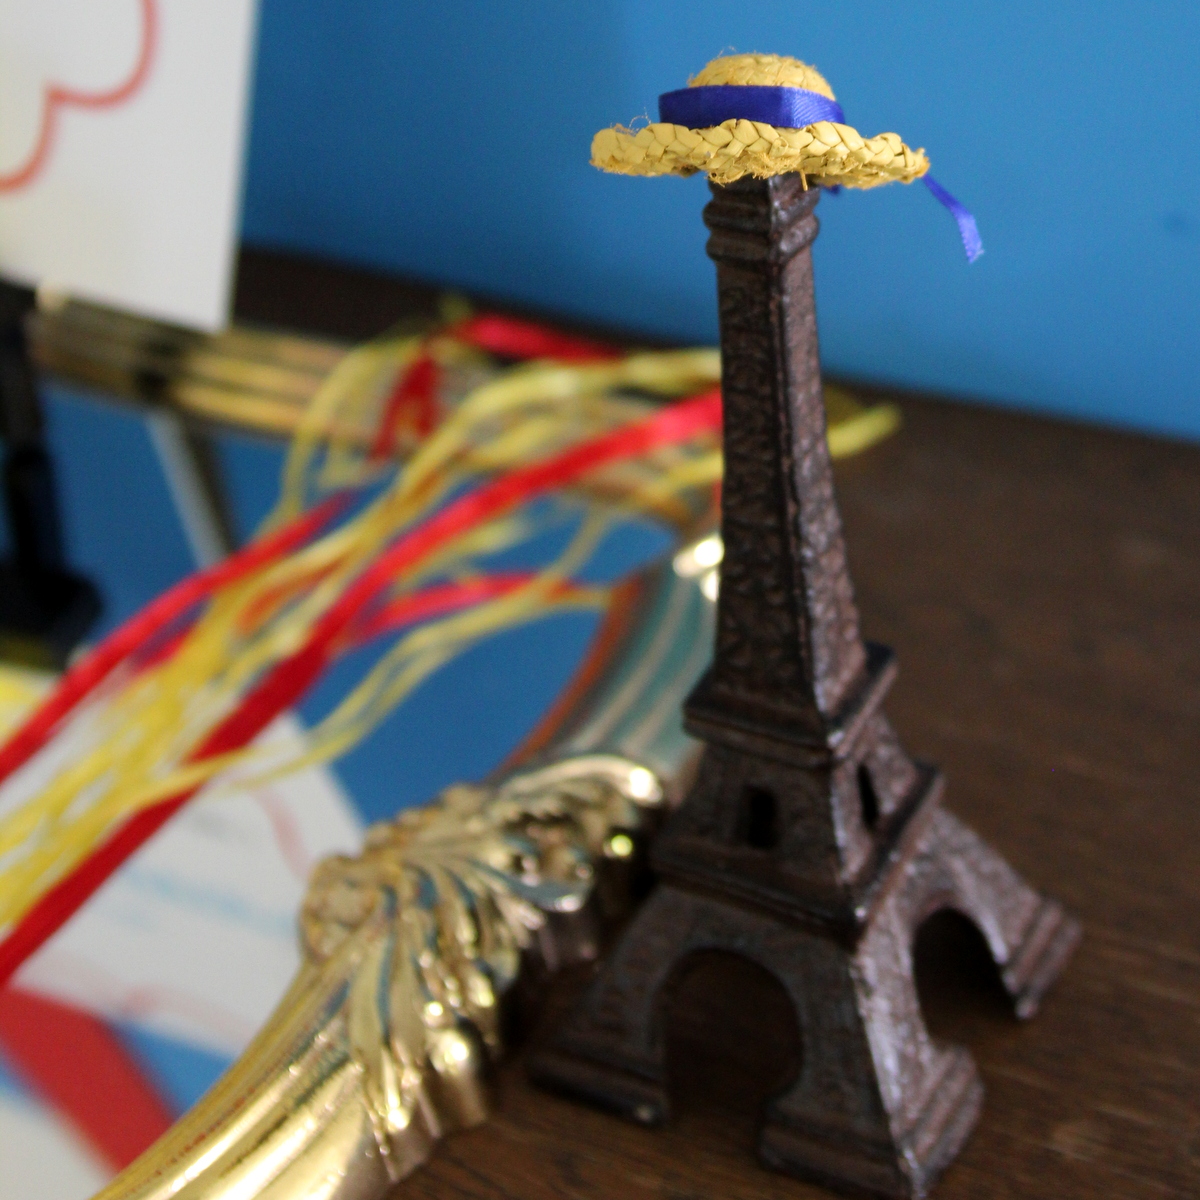 the sweetest parisian Madeline party (with tons of easy DIY party decor ideas!)